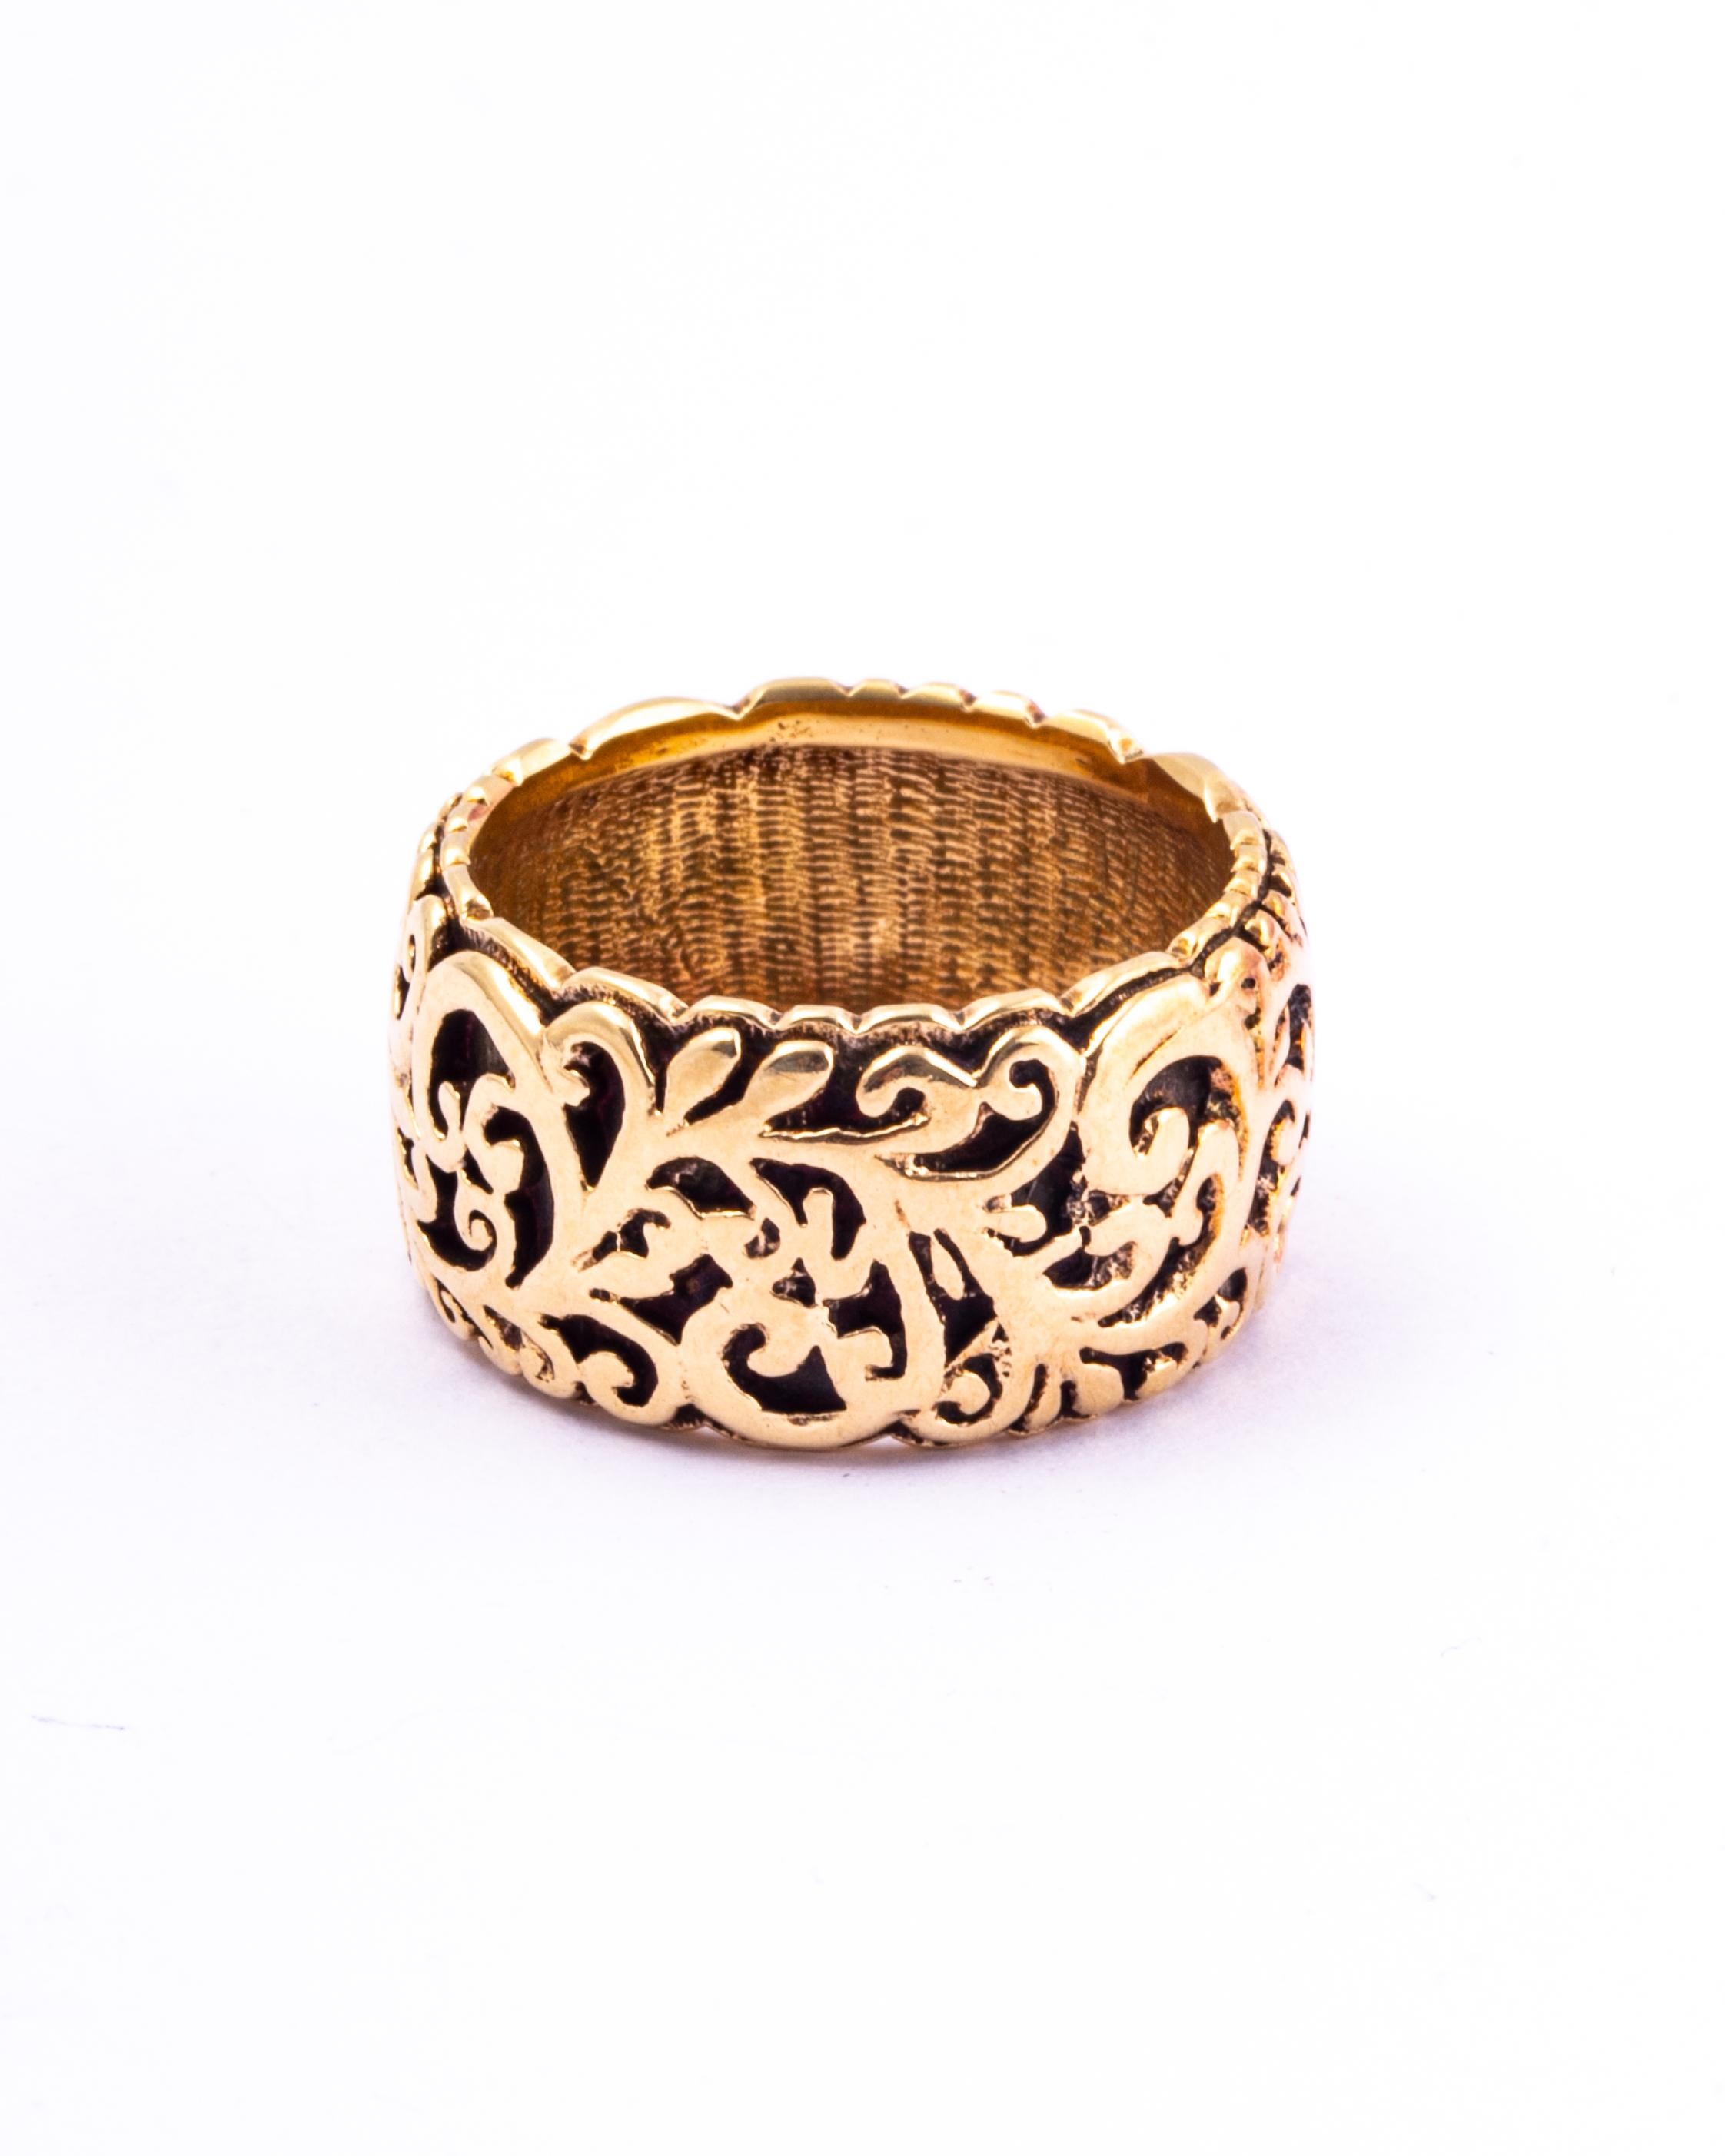 The design almost looks like laser cut fabric. It is super decorative and modelled in 9carat gold. Made in London, England. 

Size: L 1/2 or 6 
Band Width: 11mm

Weight: 7.46g